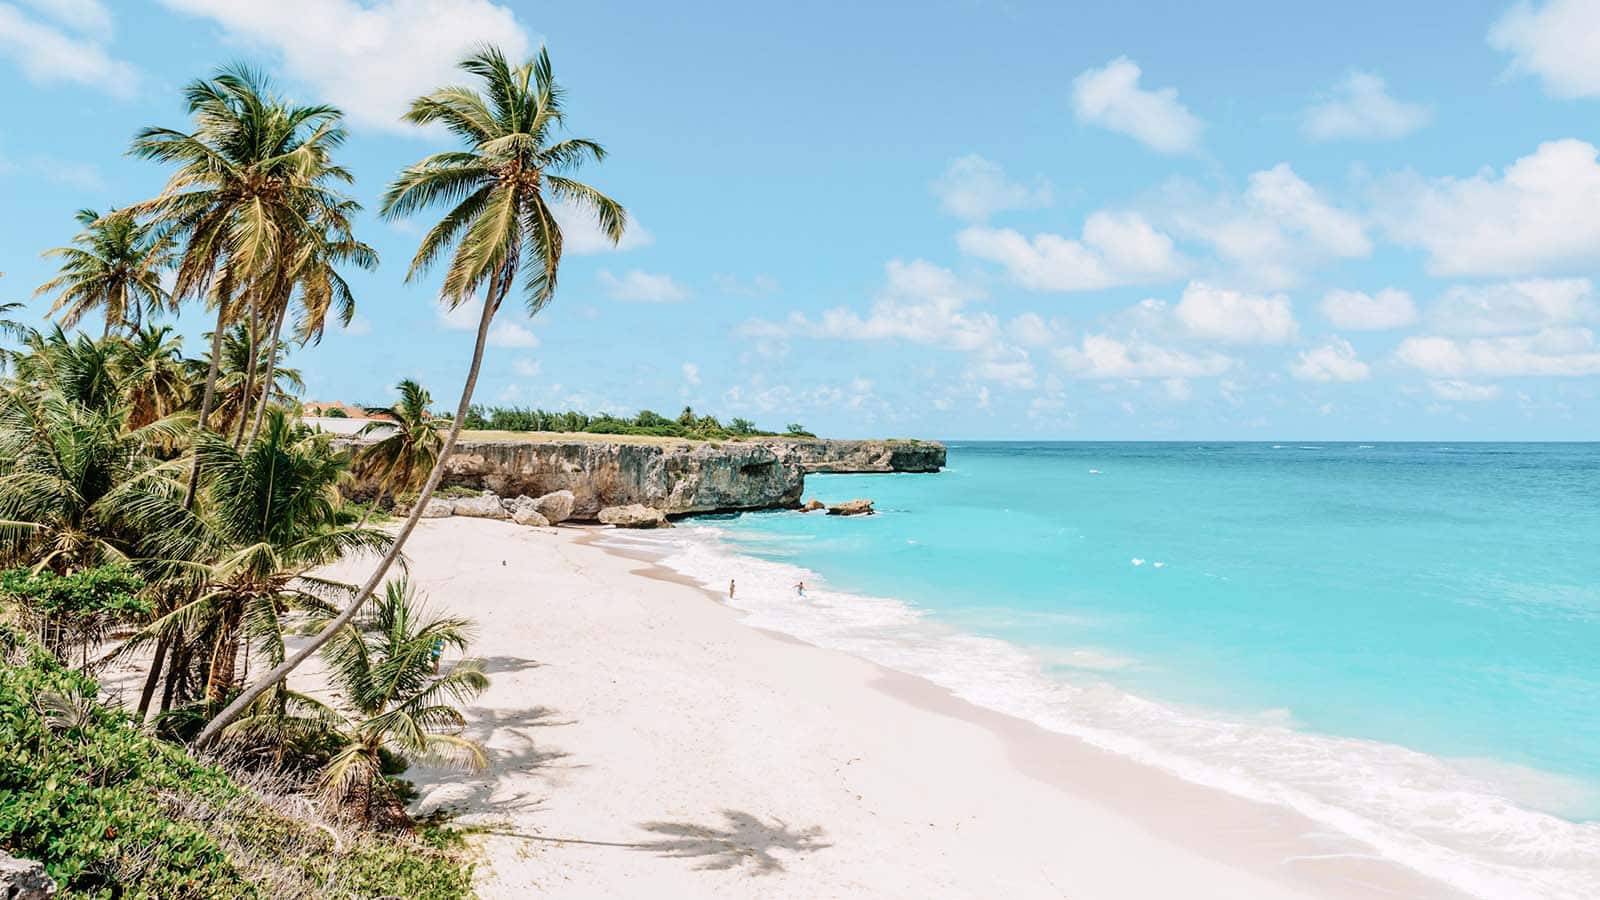 <p>Traveling without a visa means you can save time and money and take off on a whim whenever you feel like it. With the incredible islands of the Caribbean so close, it’s an obvious choice for Americans. But what about visa requirements?</p> <p>In fact, with the sole exception of Cuba, US passport holders don’t need a visa to travel to any Caribbean country. So, without further ado, here are some suggestions for your next visit to this irresistible part of the world! </p>